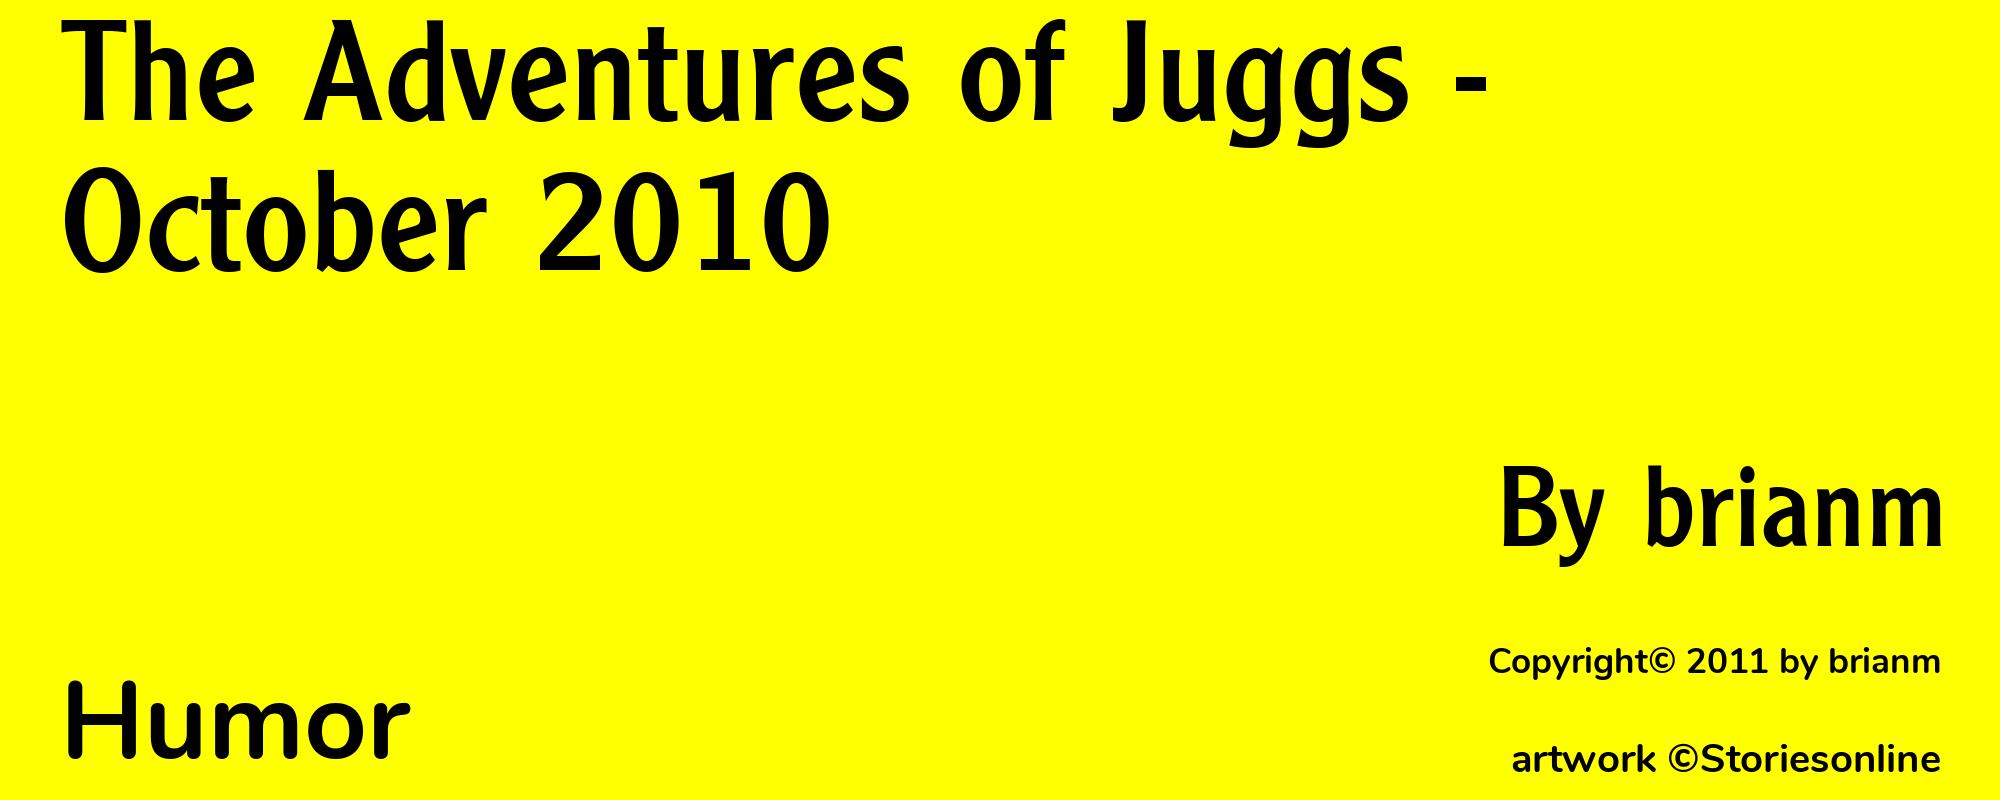 The Adventures of Juggs - October 2010 - Cover